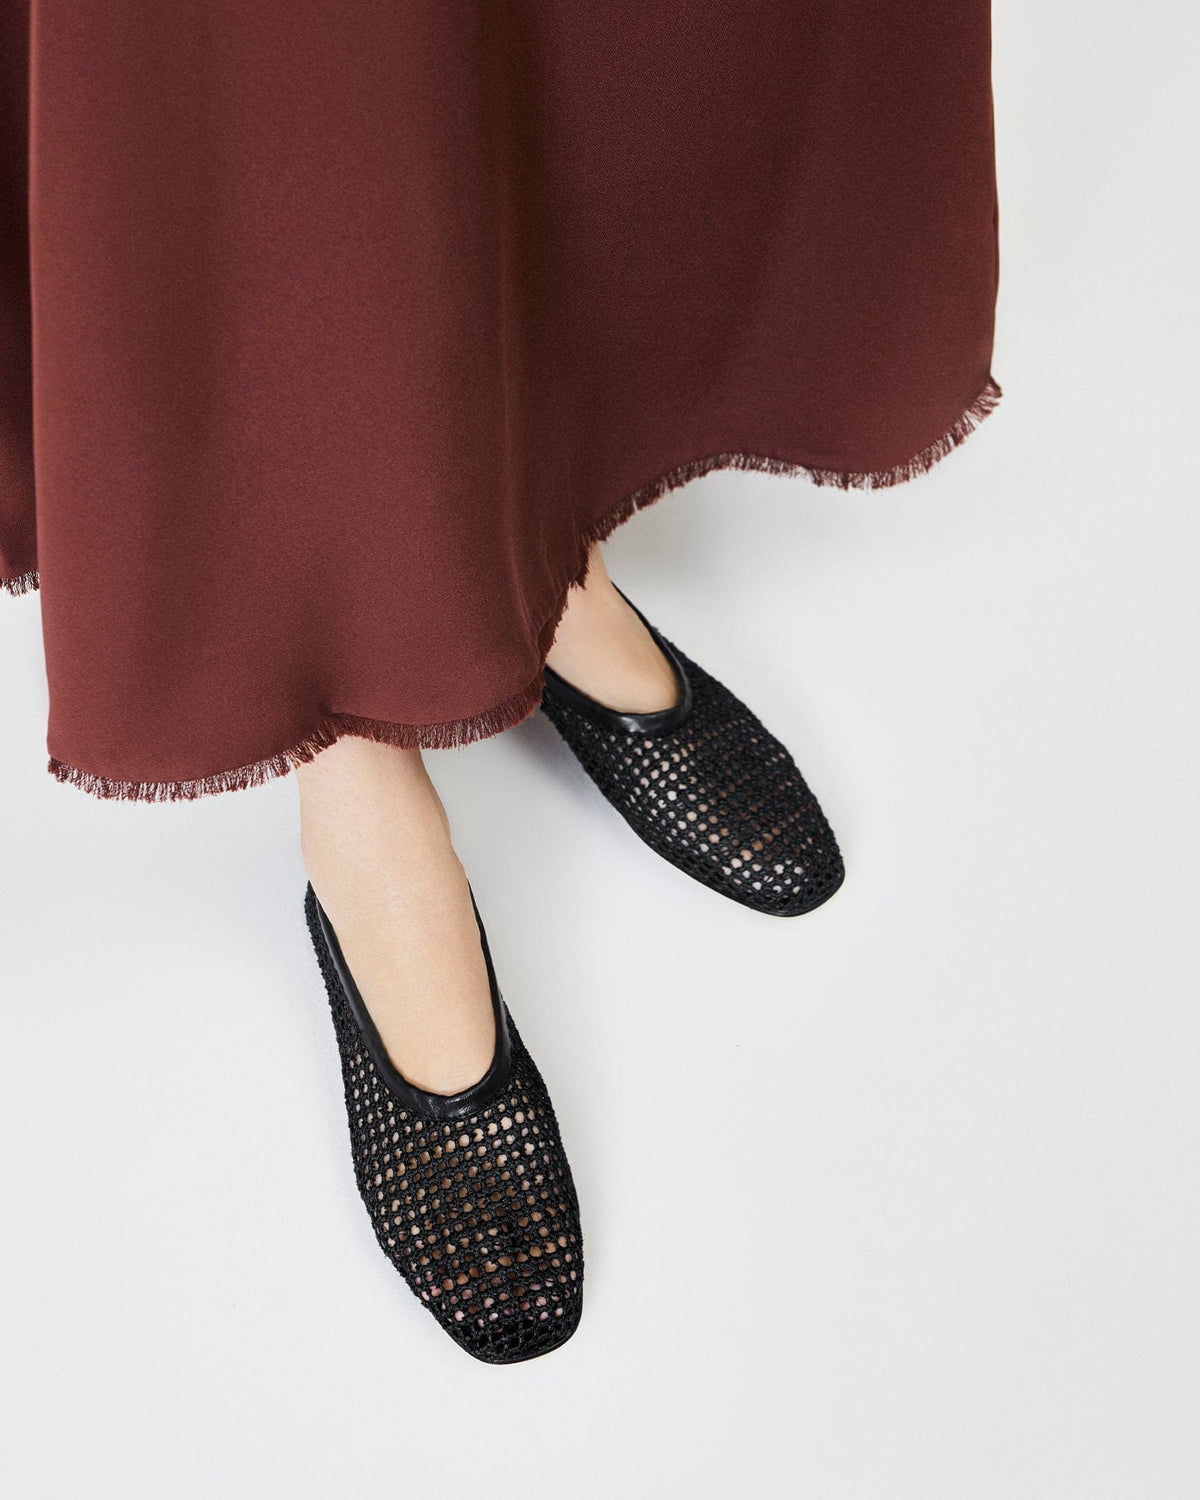 woven flats in black woven leather